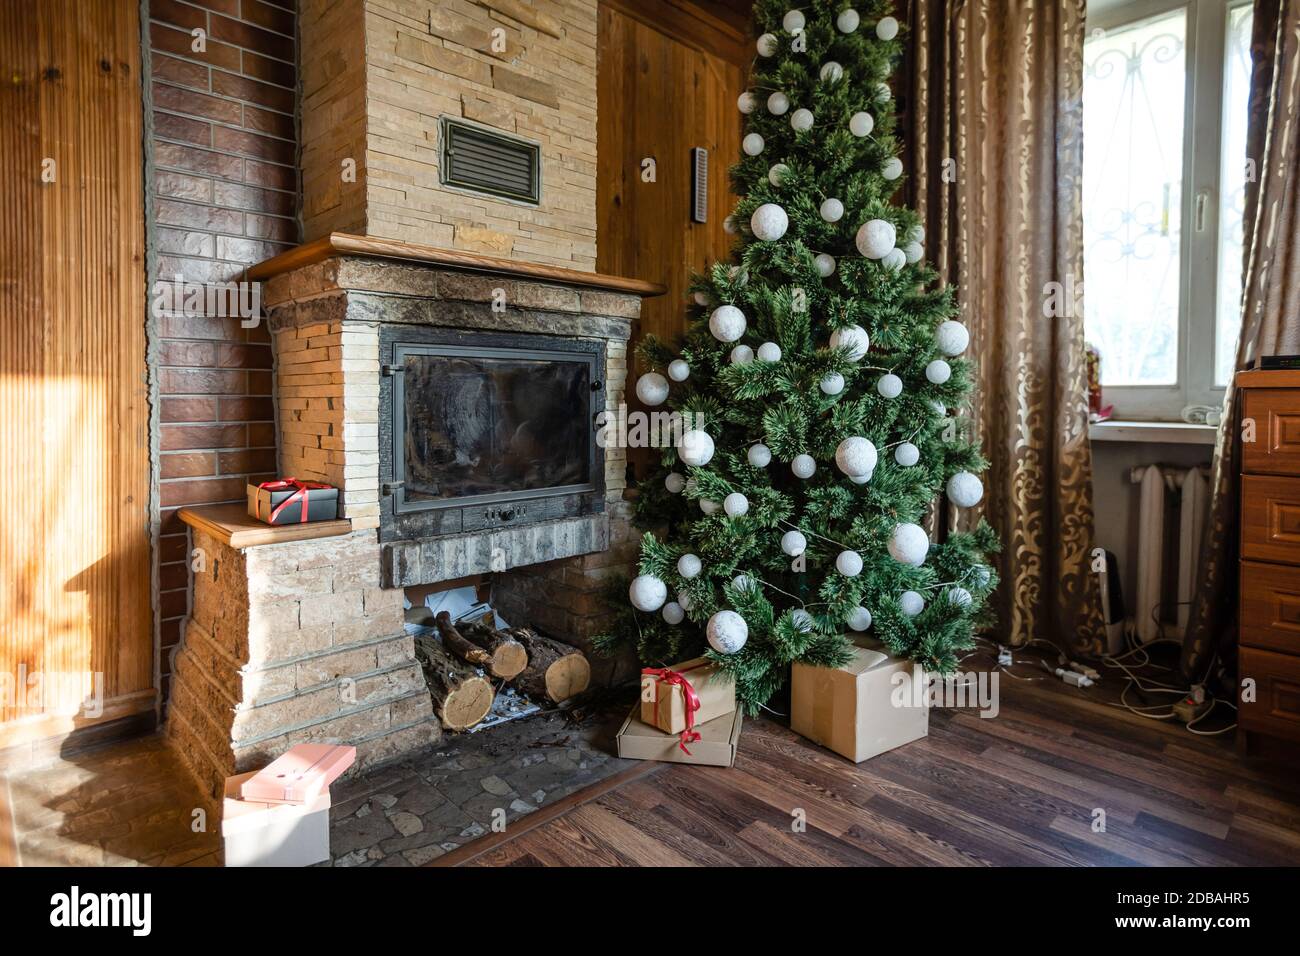 Photo of interior of room with a wooden wall, Christmas tree, fireplace ...